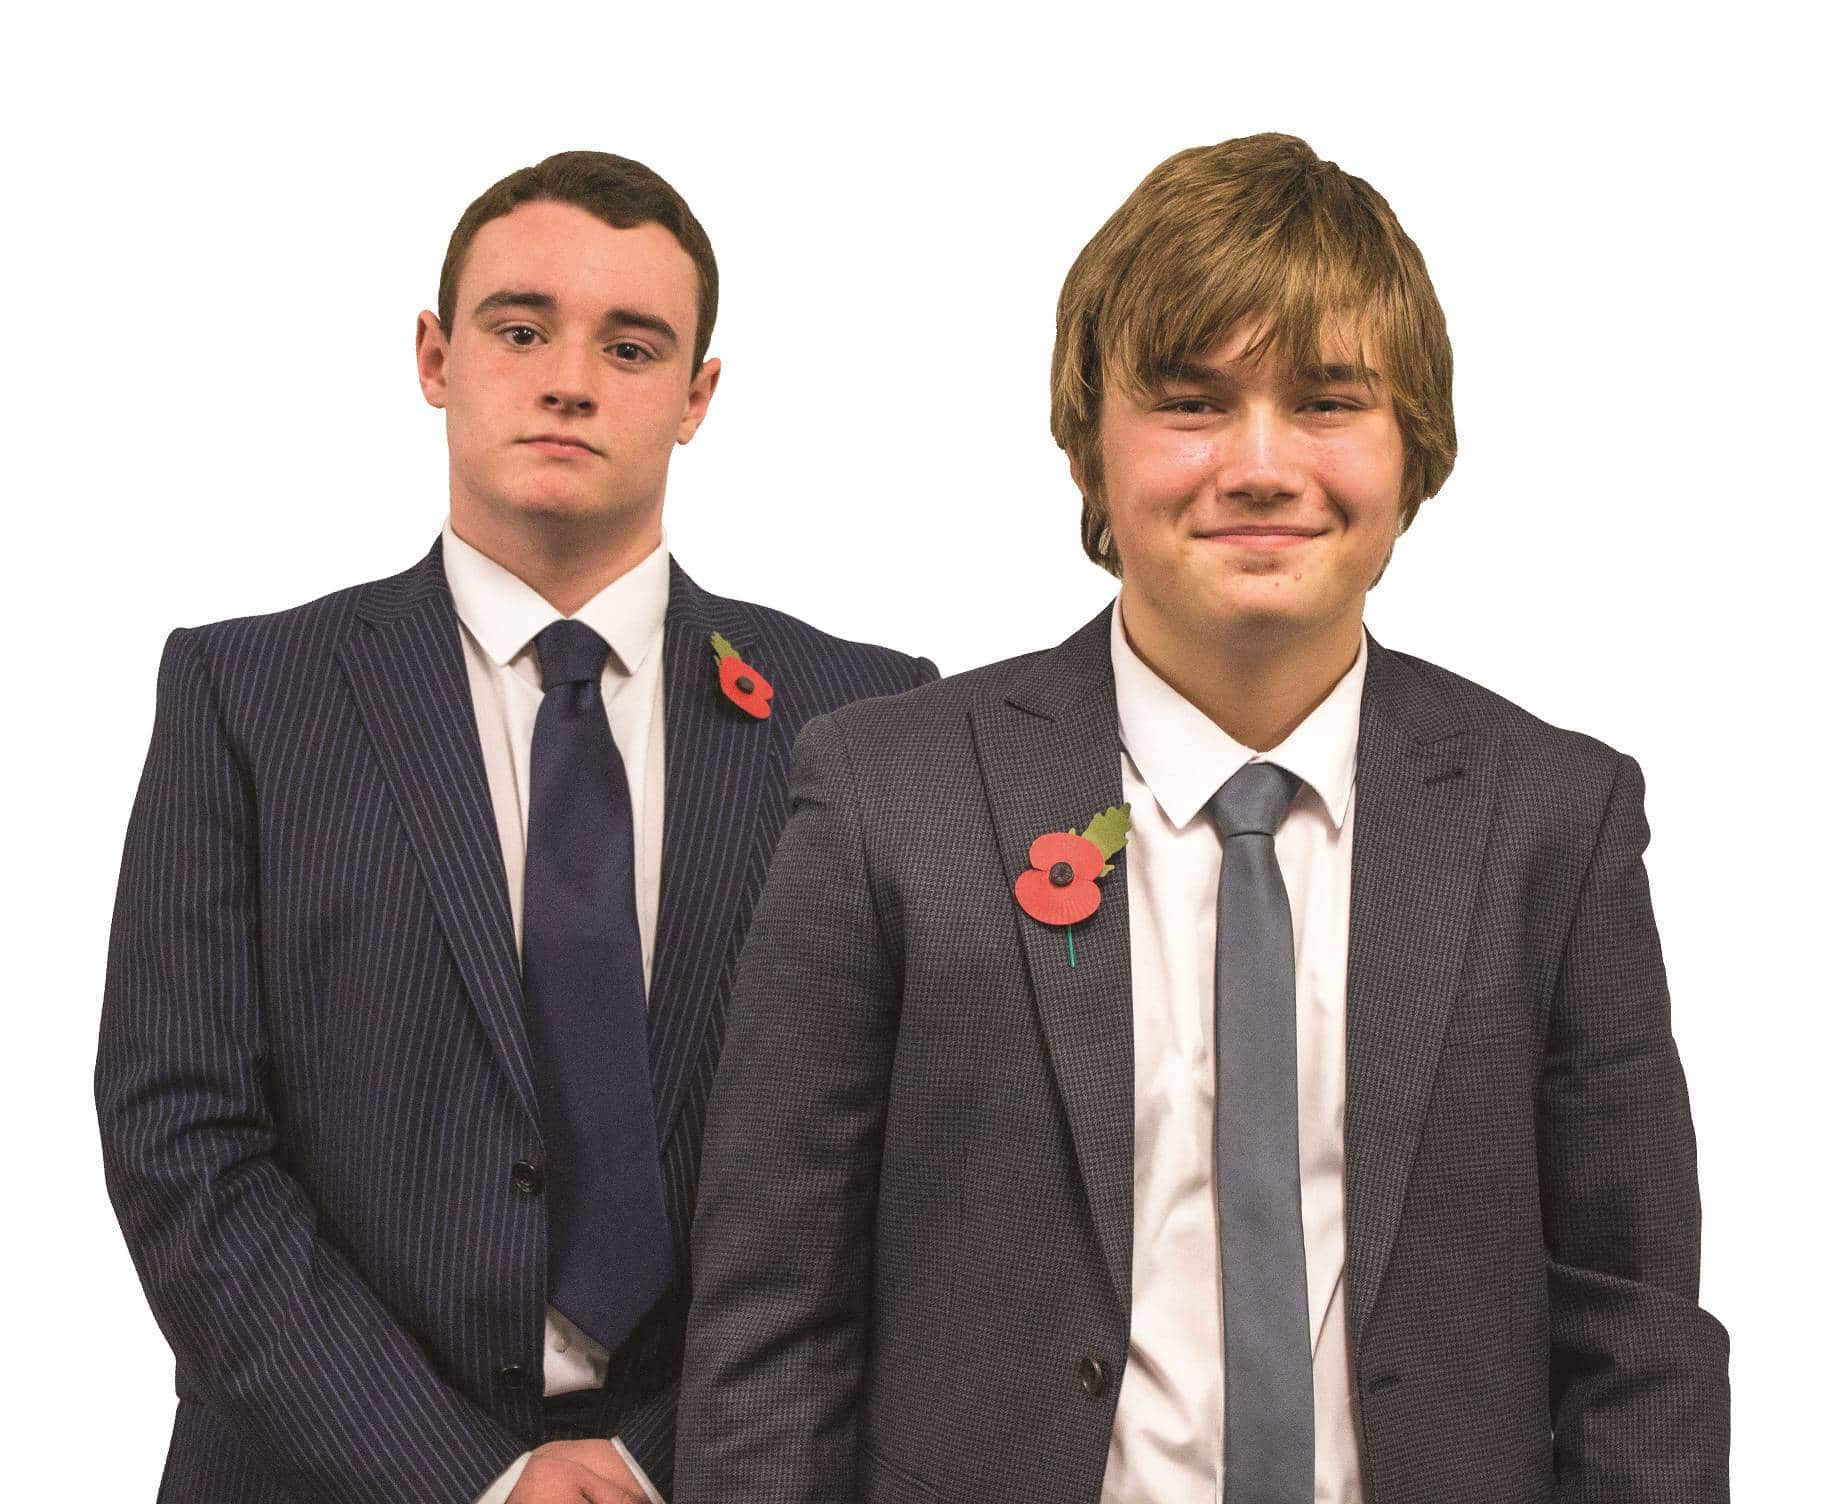 Speaking out for young people: Boys with a passion for politics